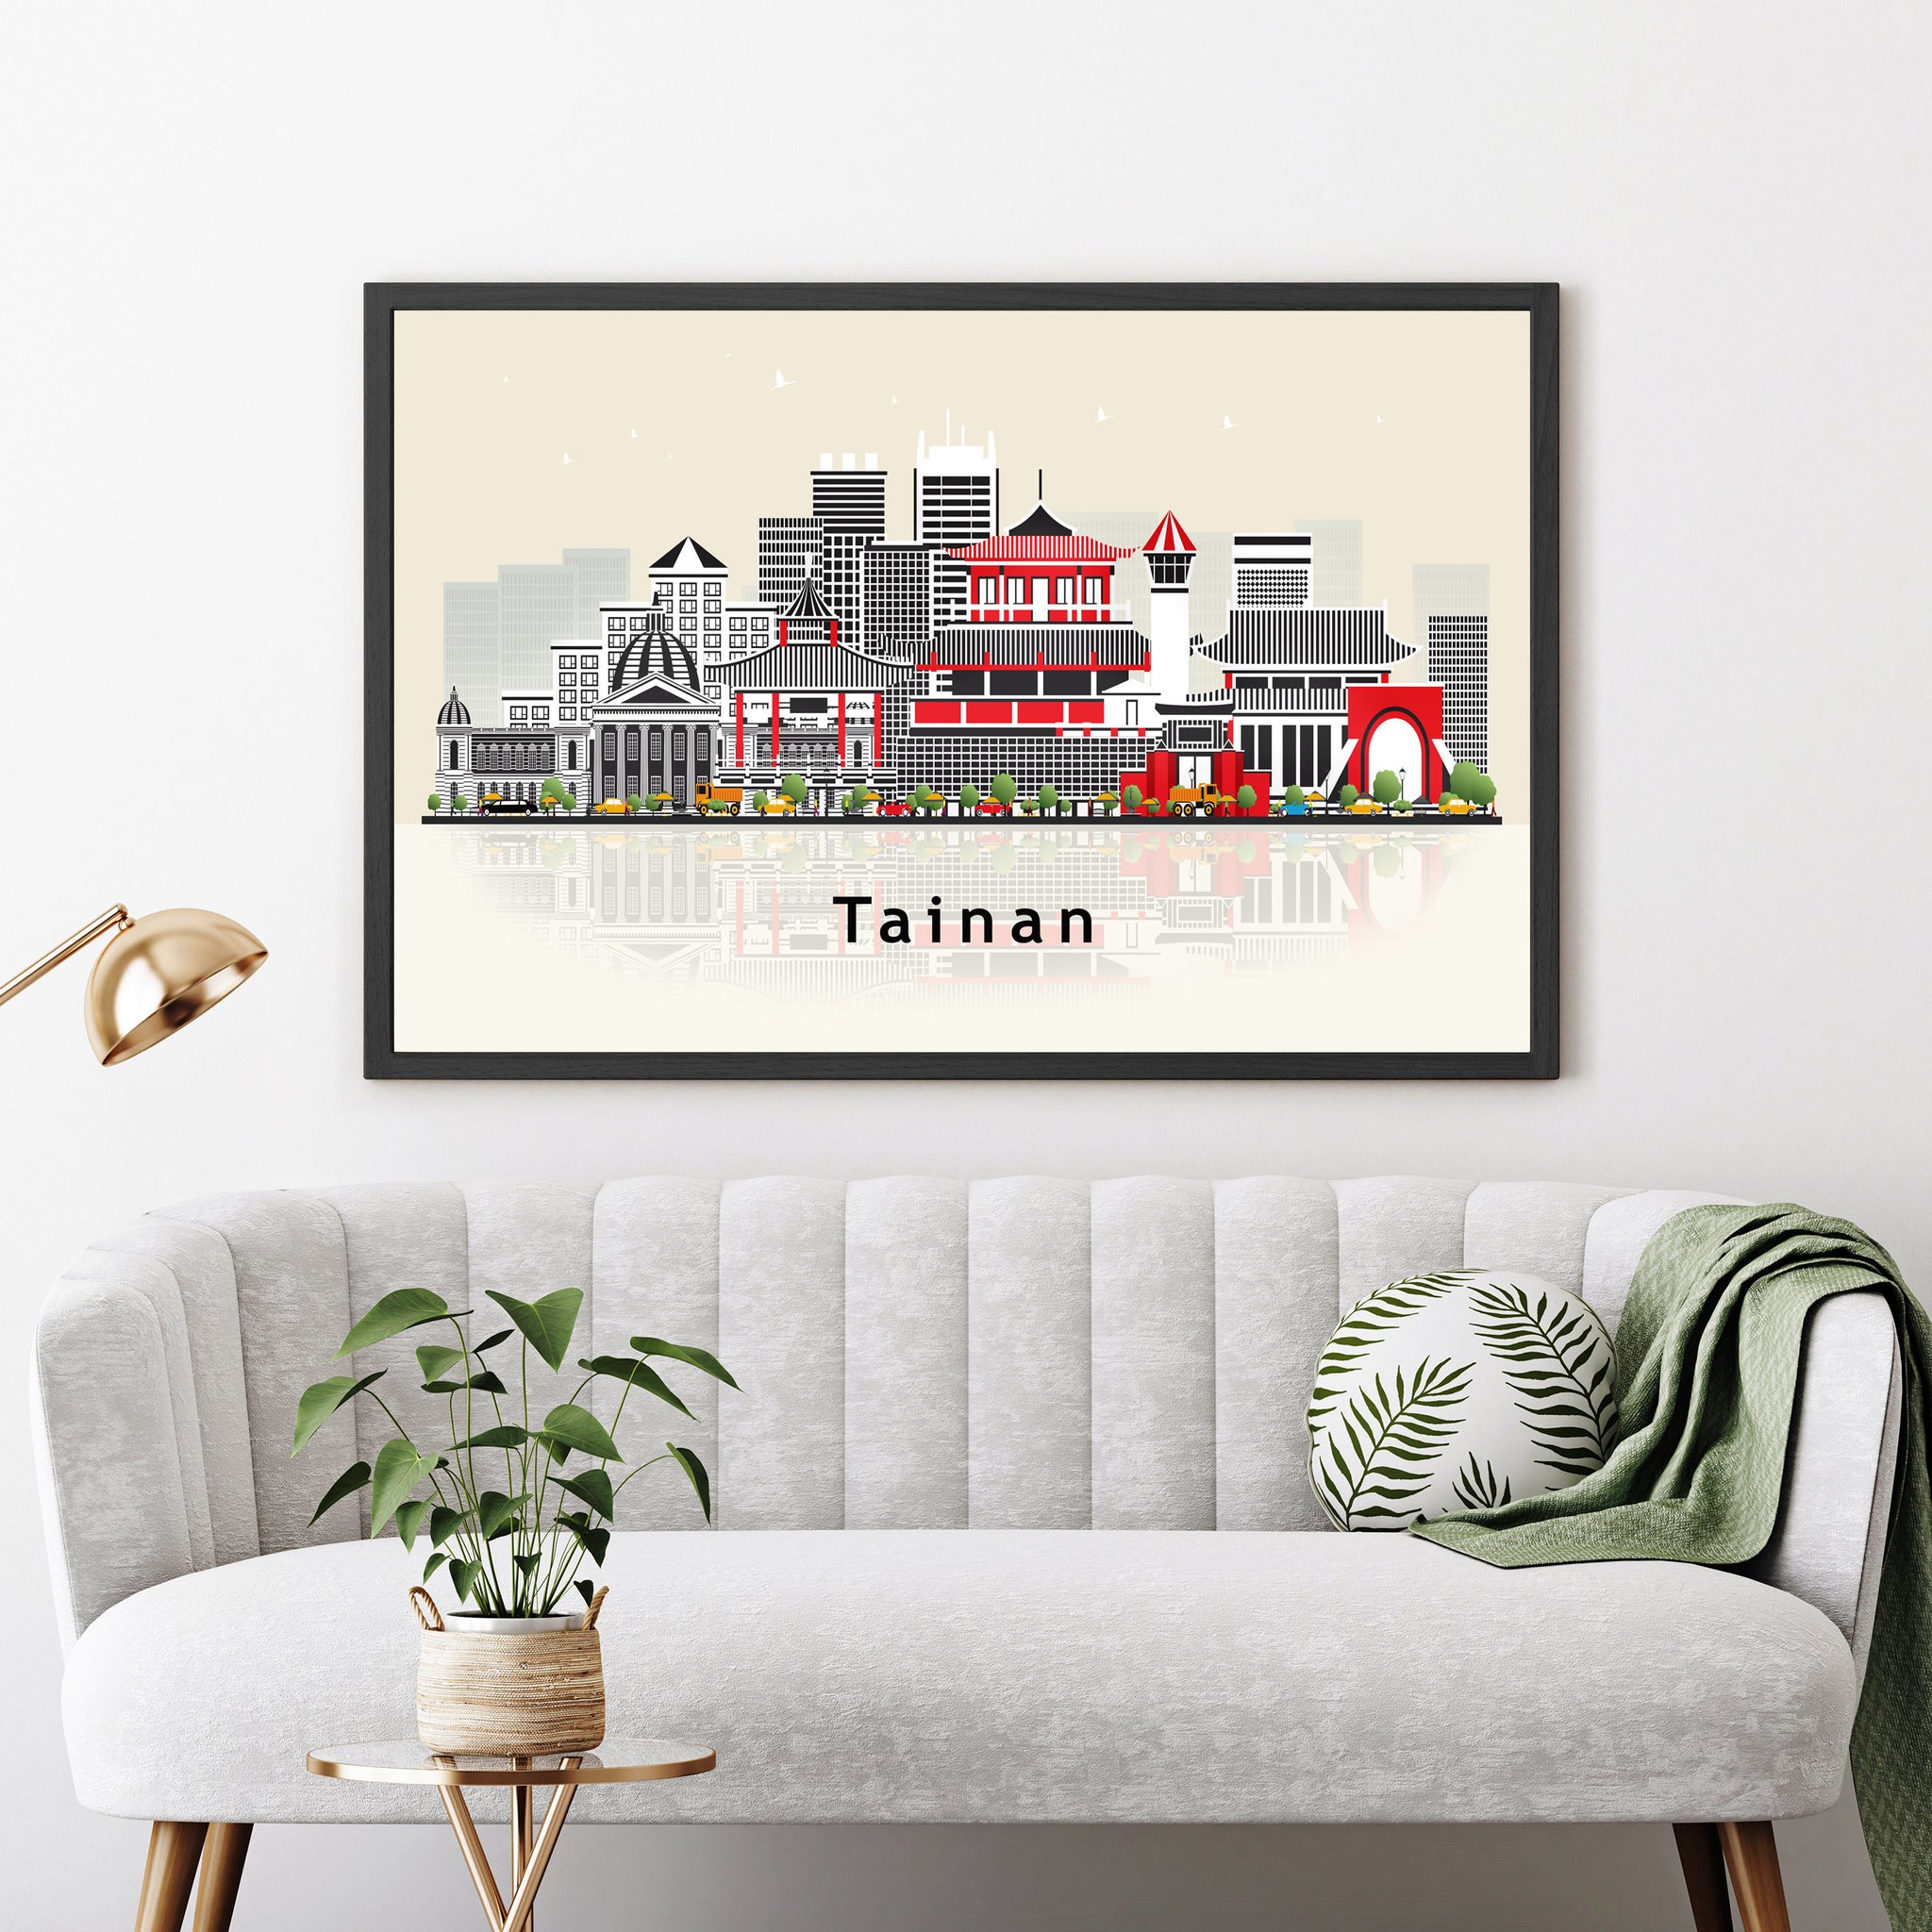 TAINAN TAIWAN Illustration skyline poster, Modern skyline cityscape poster, Tainan city skyline landmark map poster, Home wall decorations